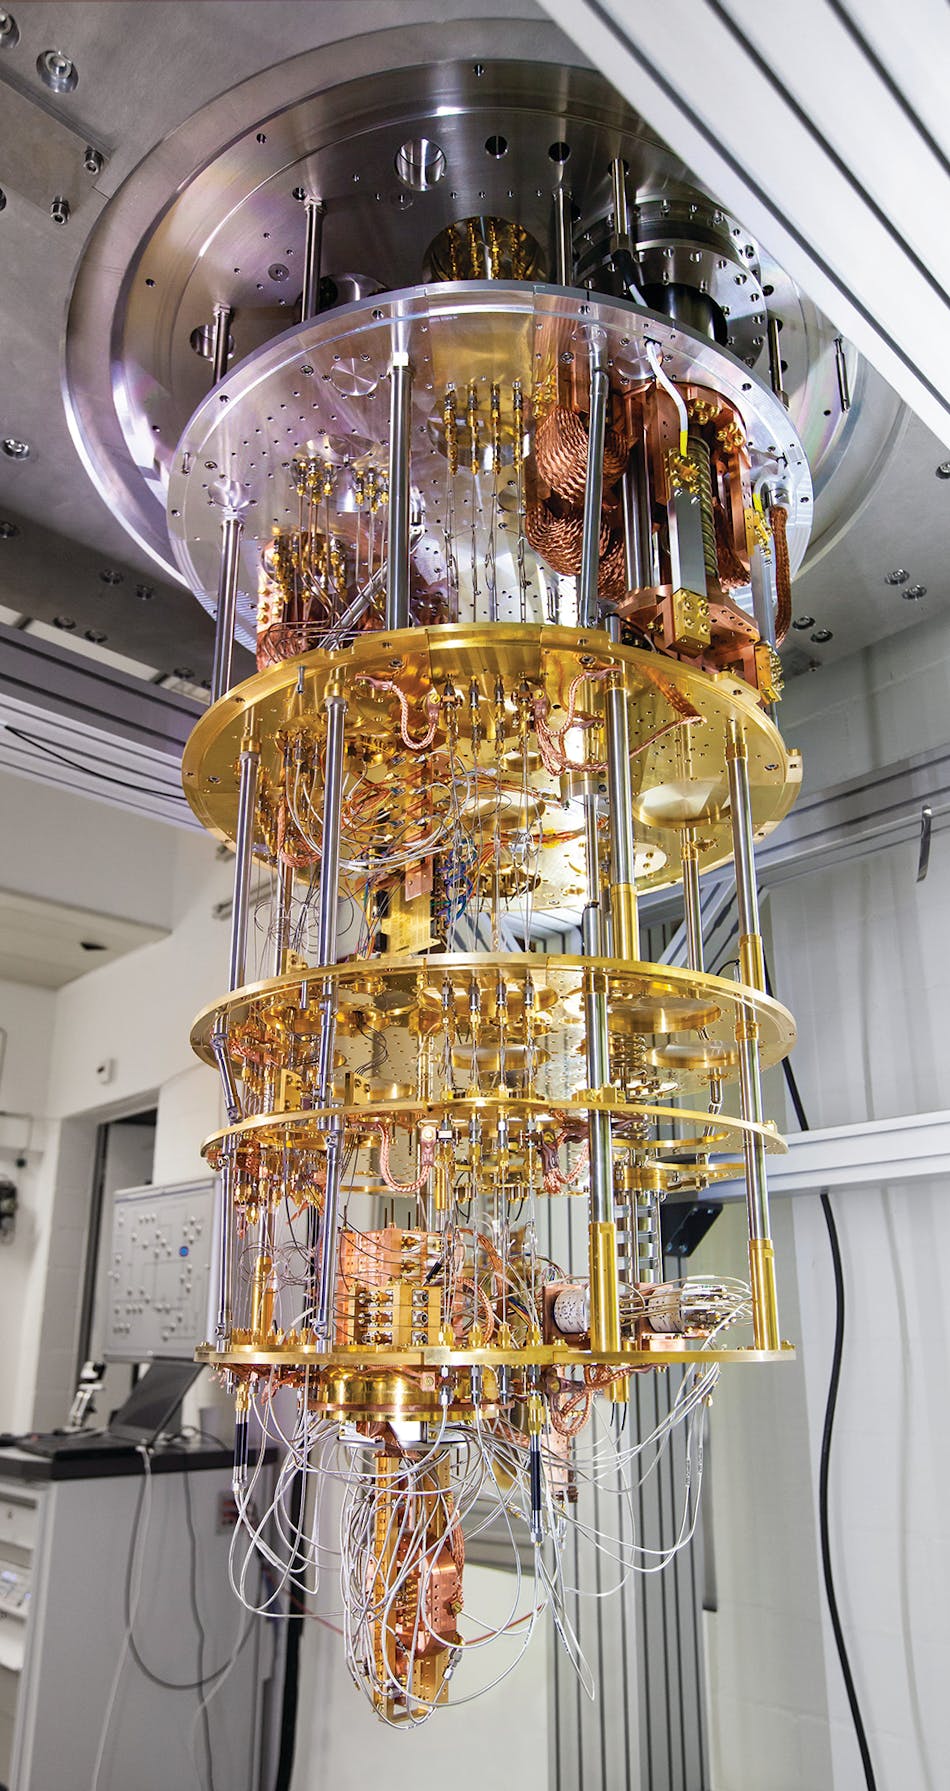 This quantum computer based on superconducting qubits is inserted into a dilution refrigerator and cooled to a temperature less than 1 Kelvin. It was built at IBM Research in Zurich.